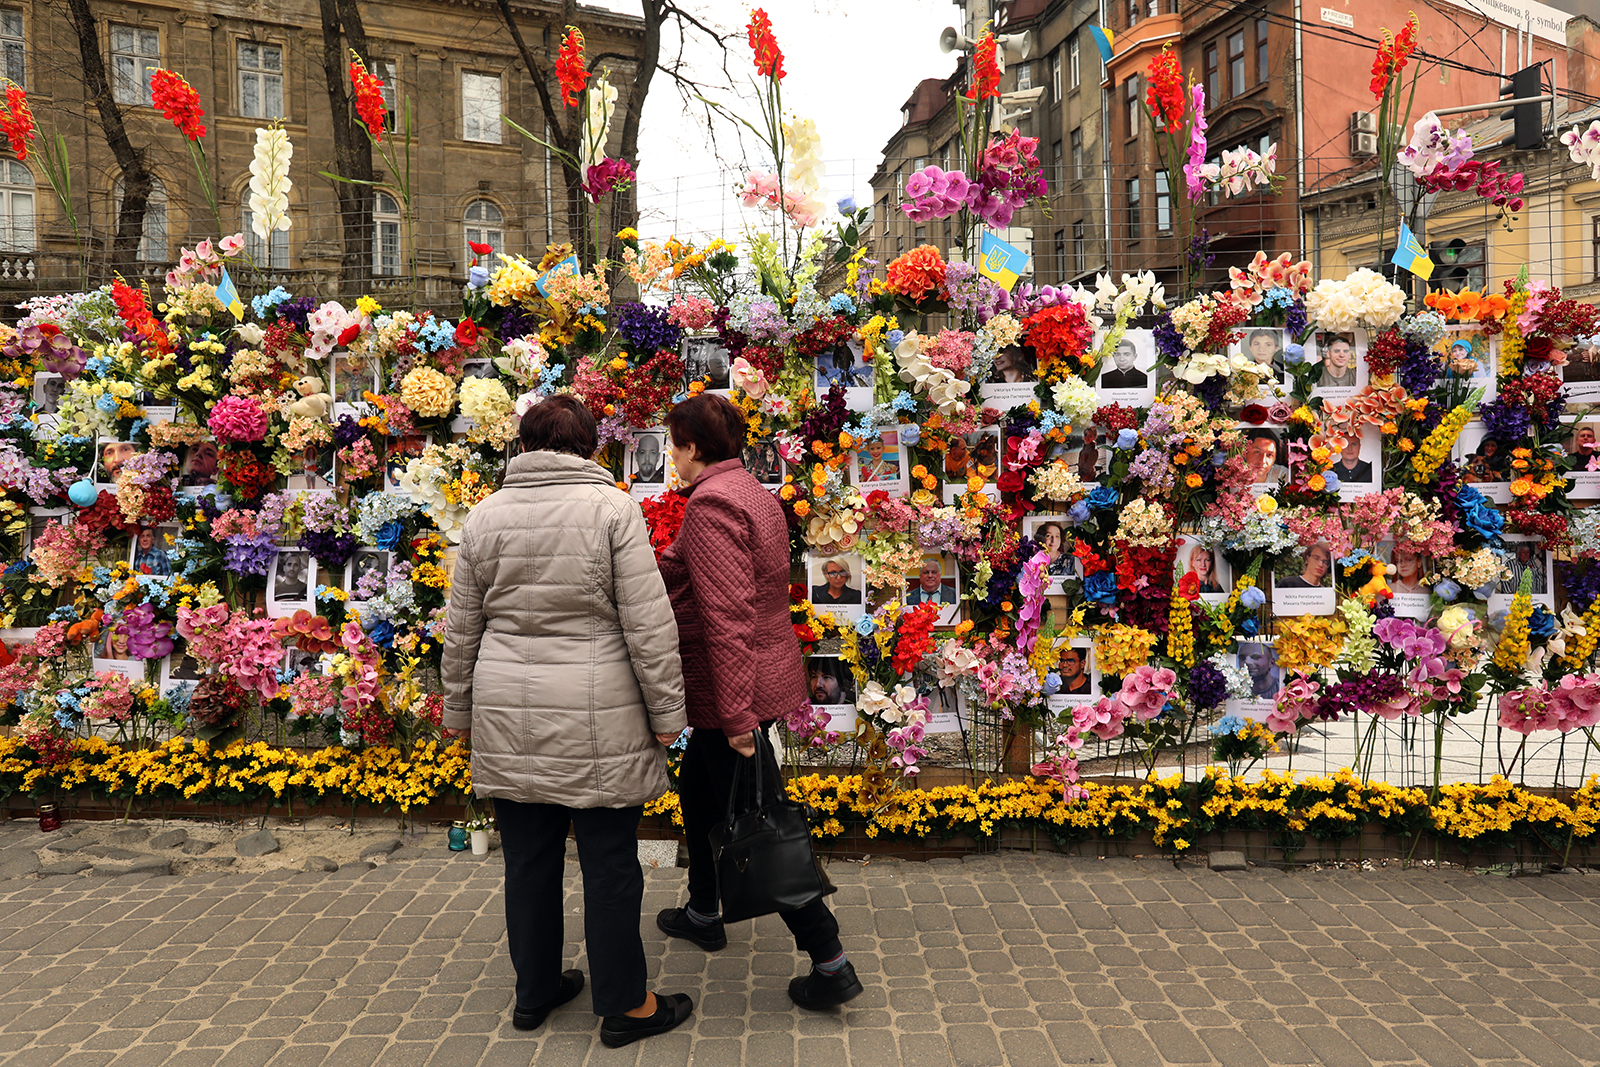 A memorial to those who have lost their lives in the Russian war on Ukraine is visited by people in downtown Lviv on Saturday, April 30.